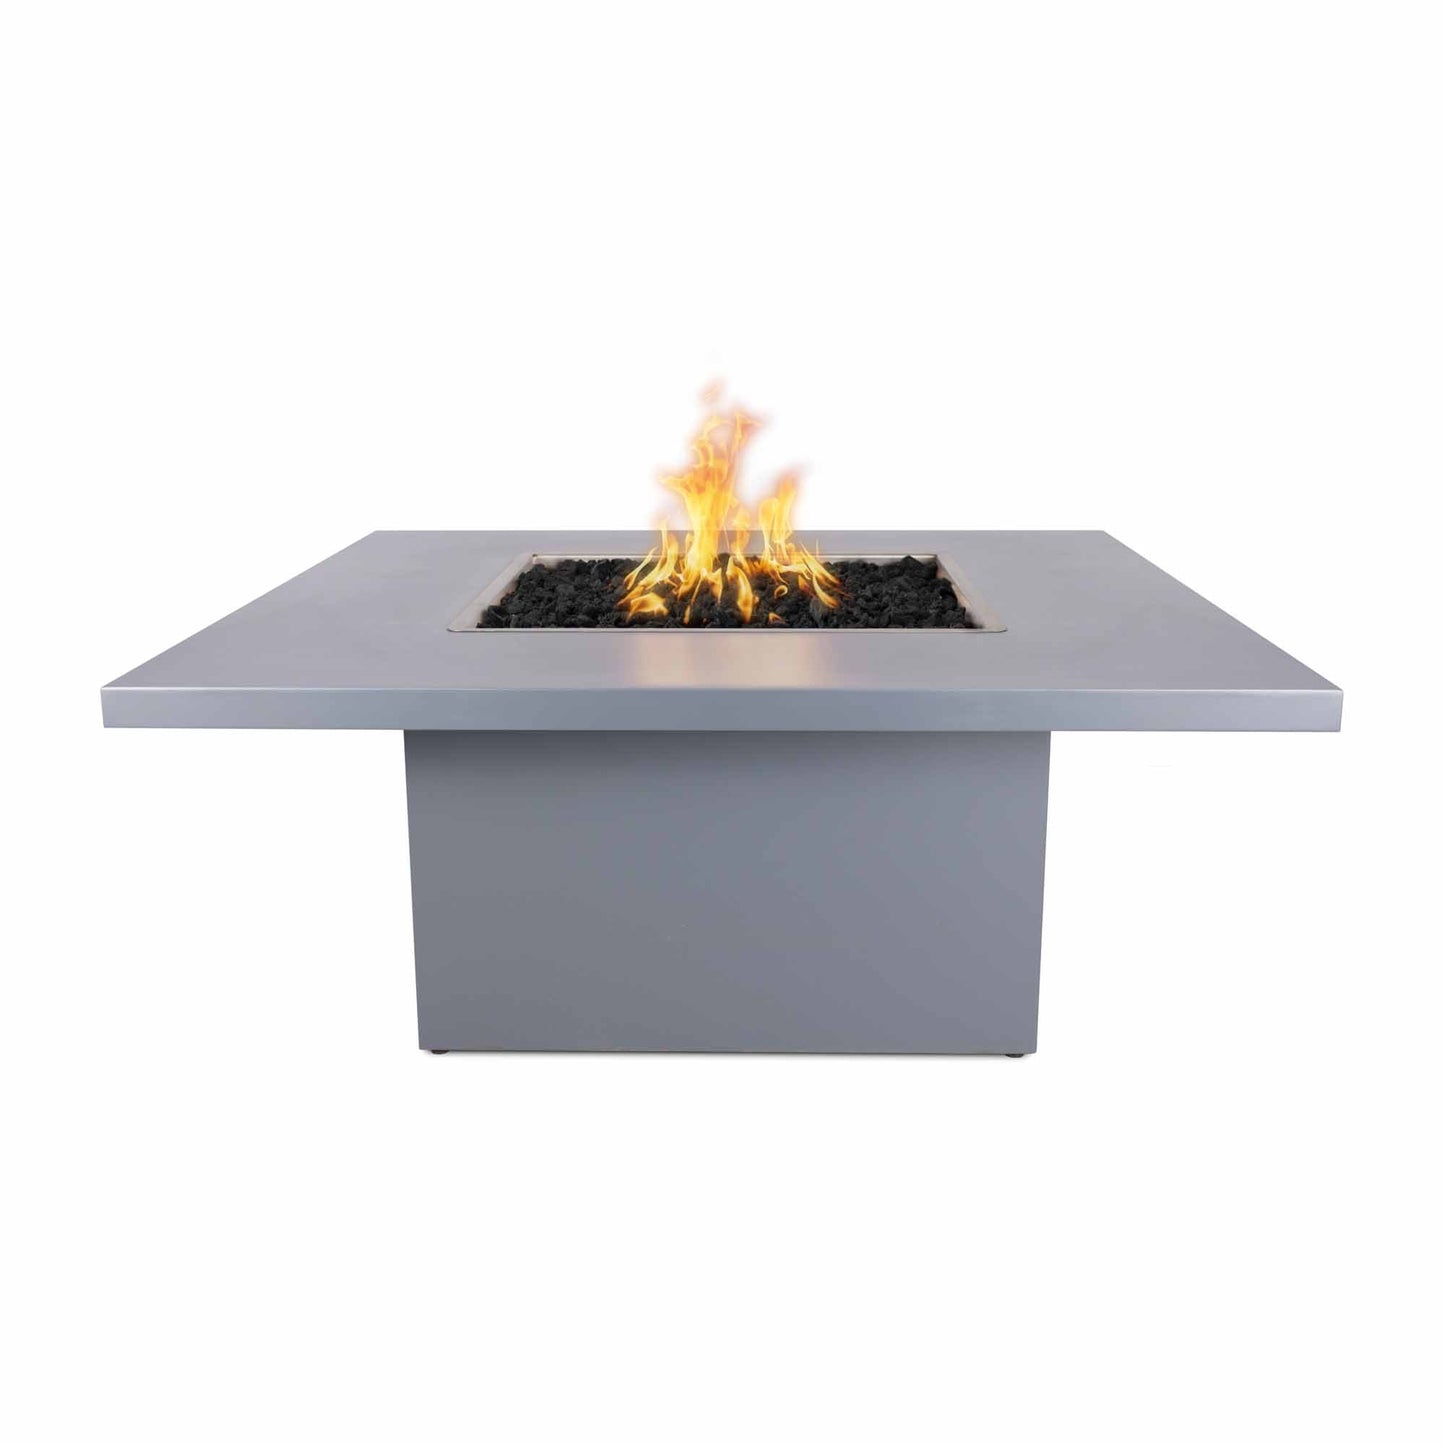 The Outdoor Plus Square Bella 36" Hammered Copper Liquid Propane Fire Pit with Flame Sense with Spark Ignition